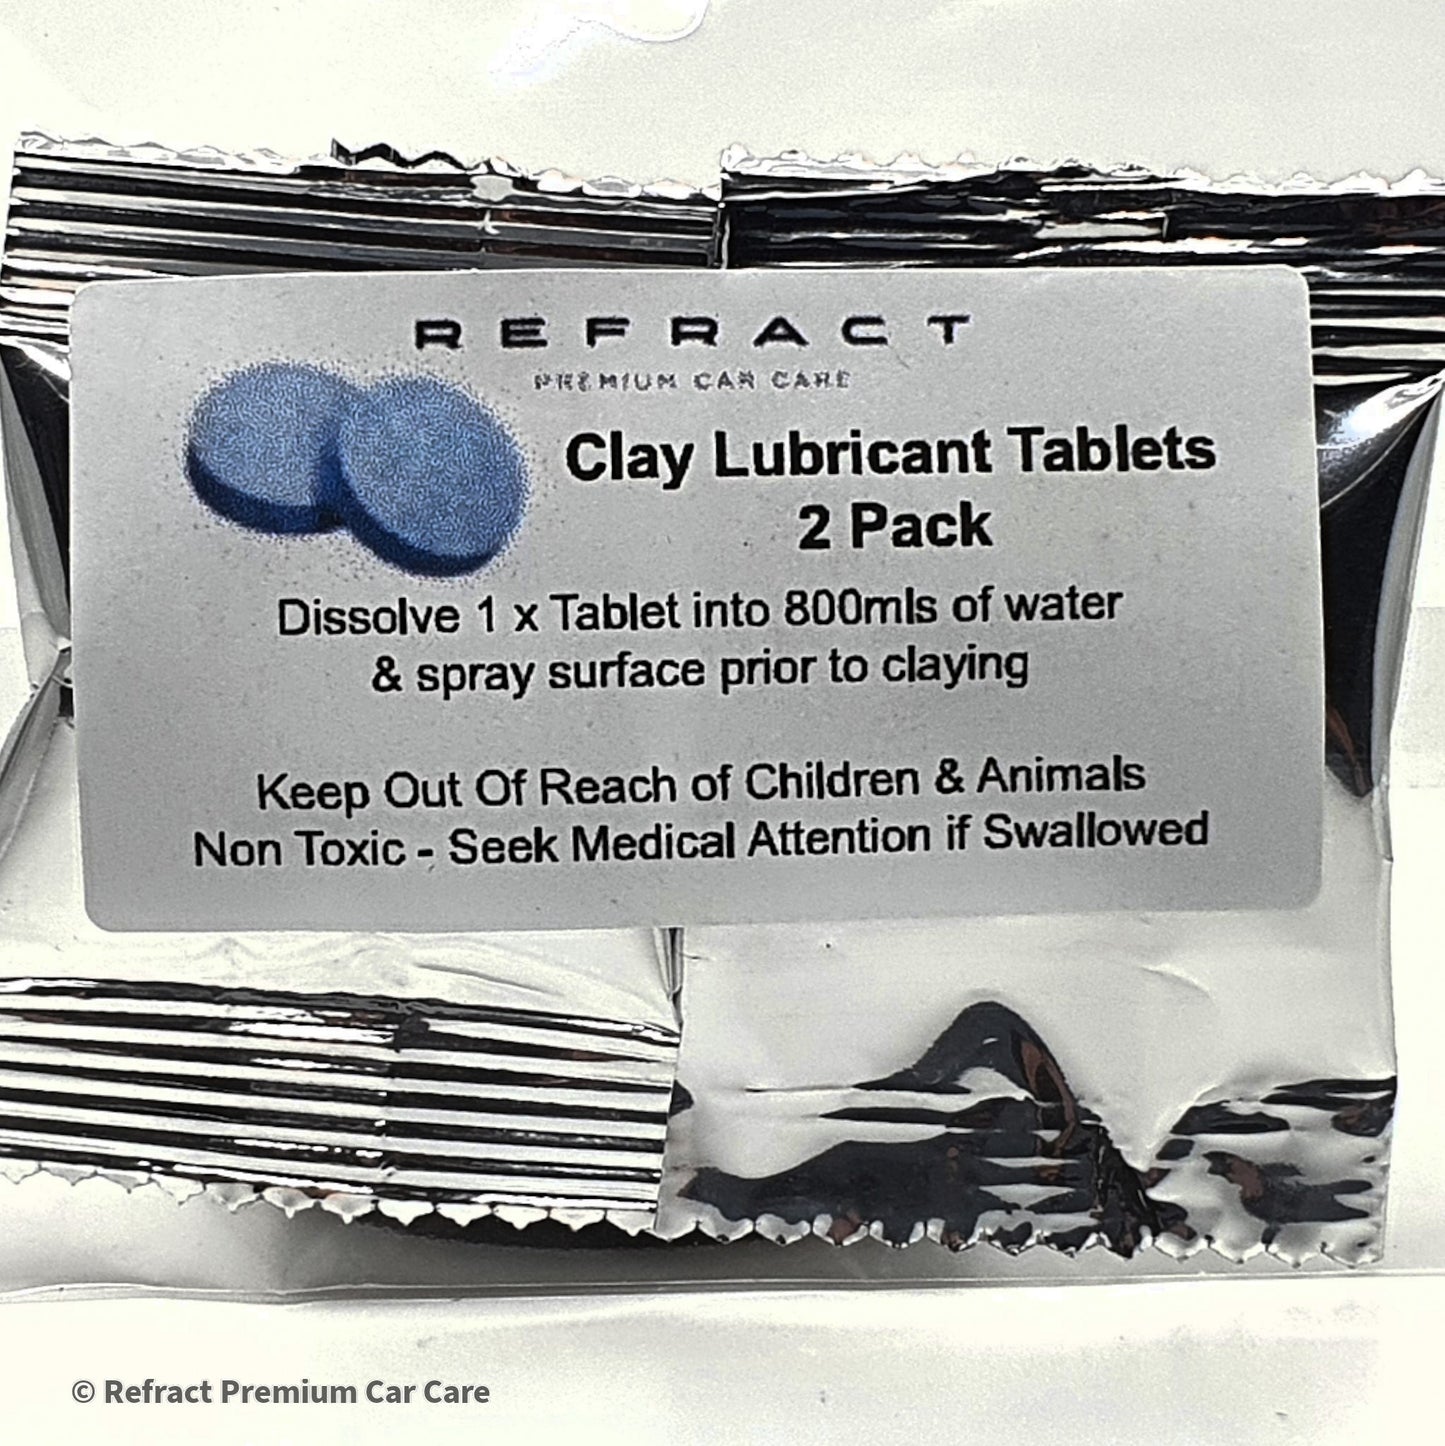 Refract Premium Car Care Products Refract Finger Clay Pad - International Professional Detailing Award Winning - Includes 2 Clay Lubricant Dissolving Tablets $34.95